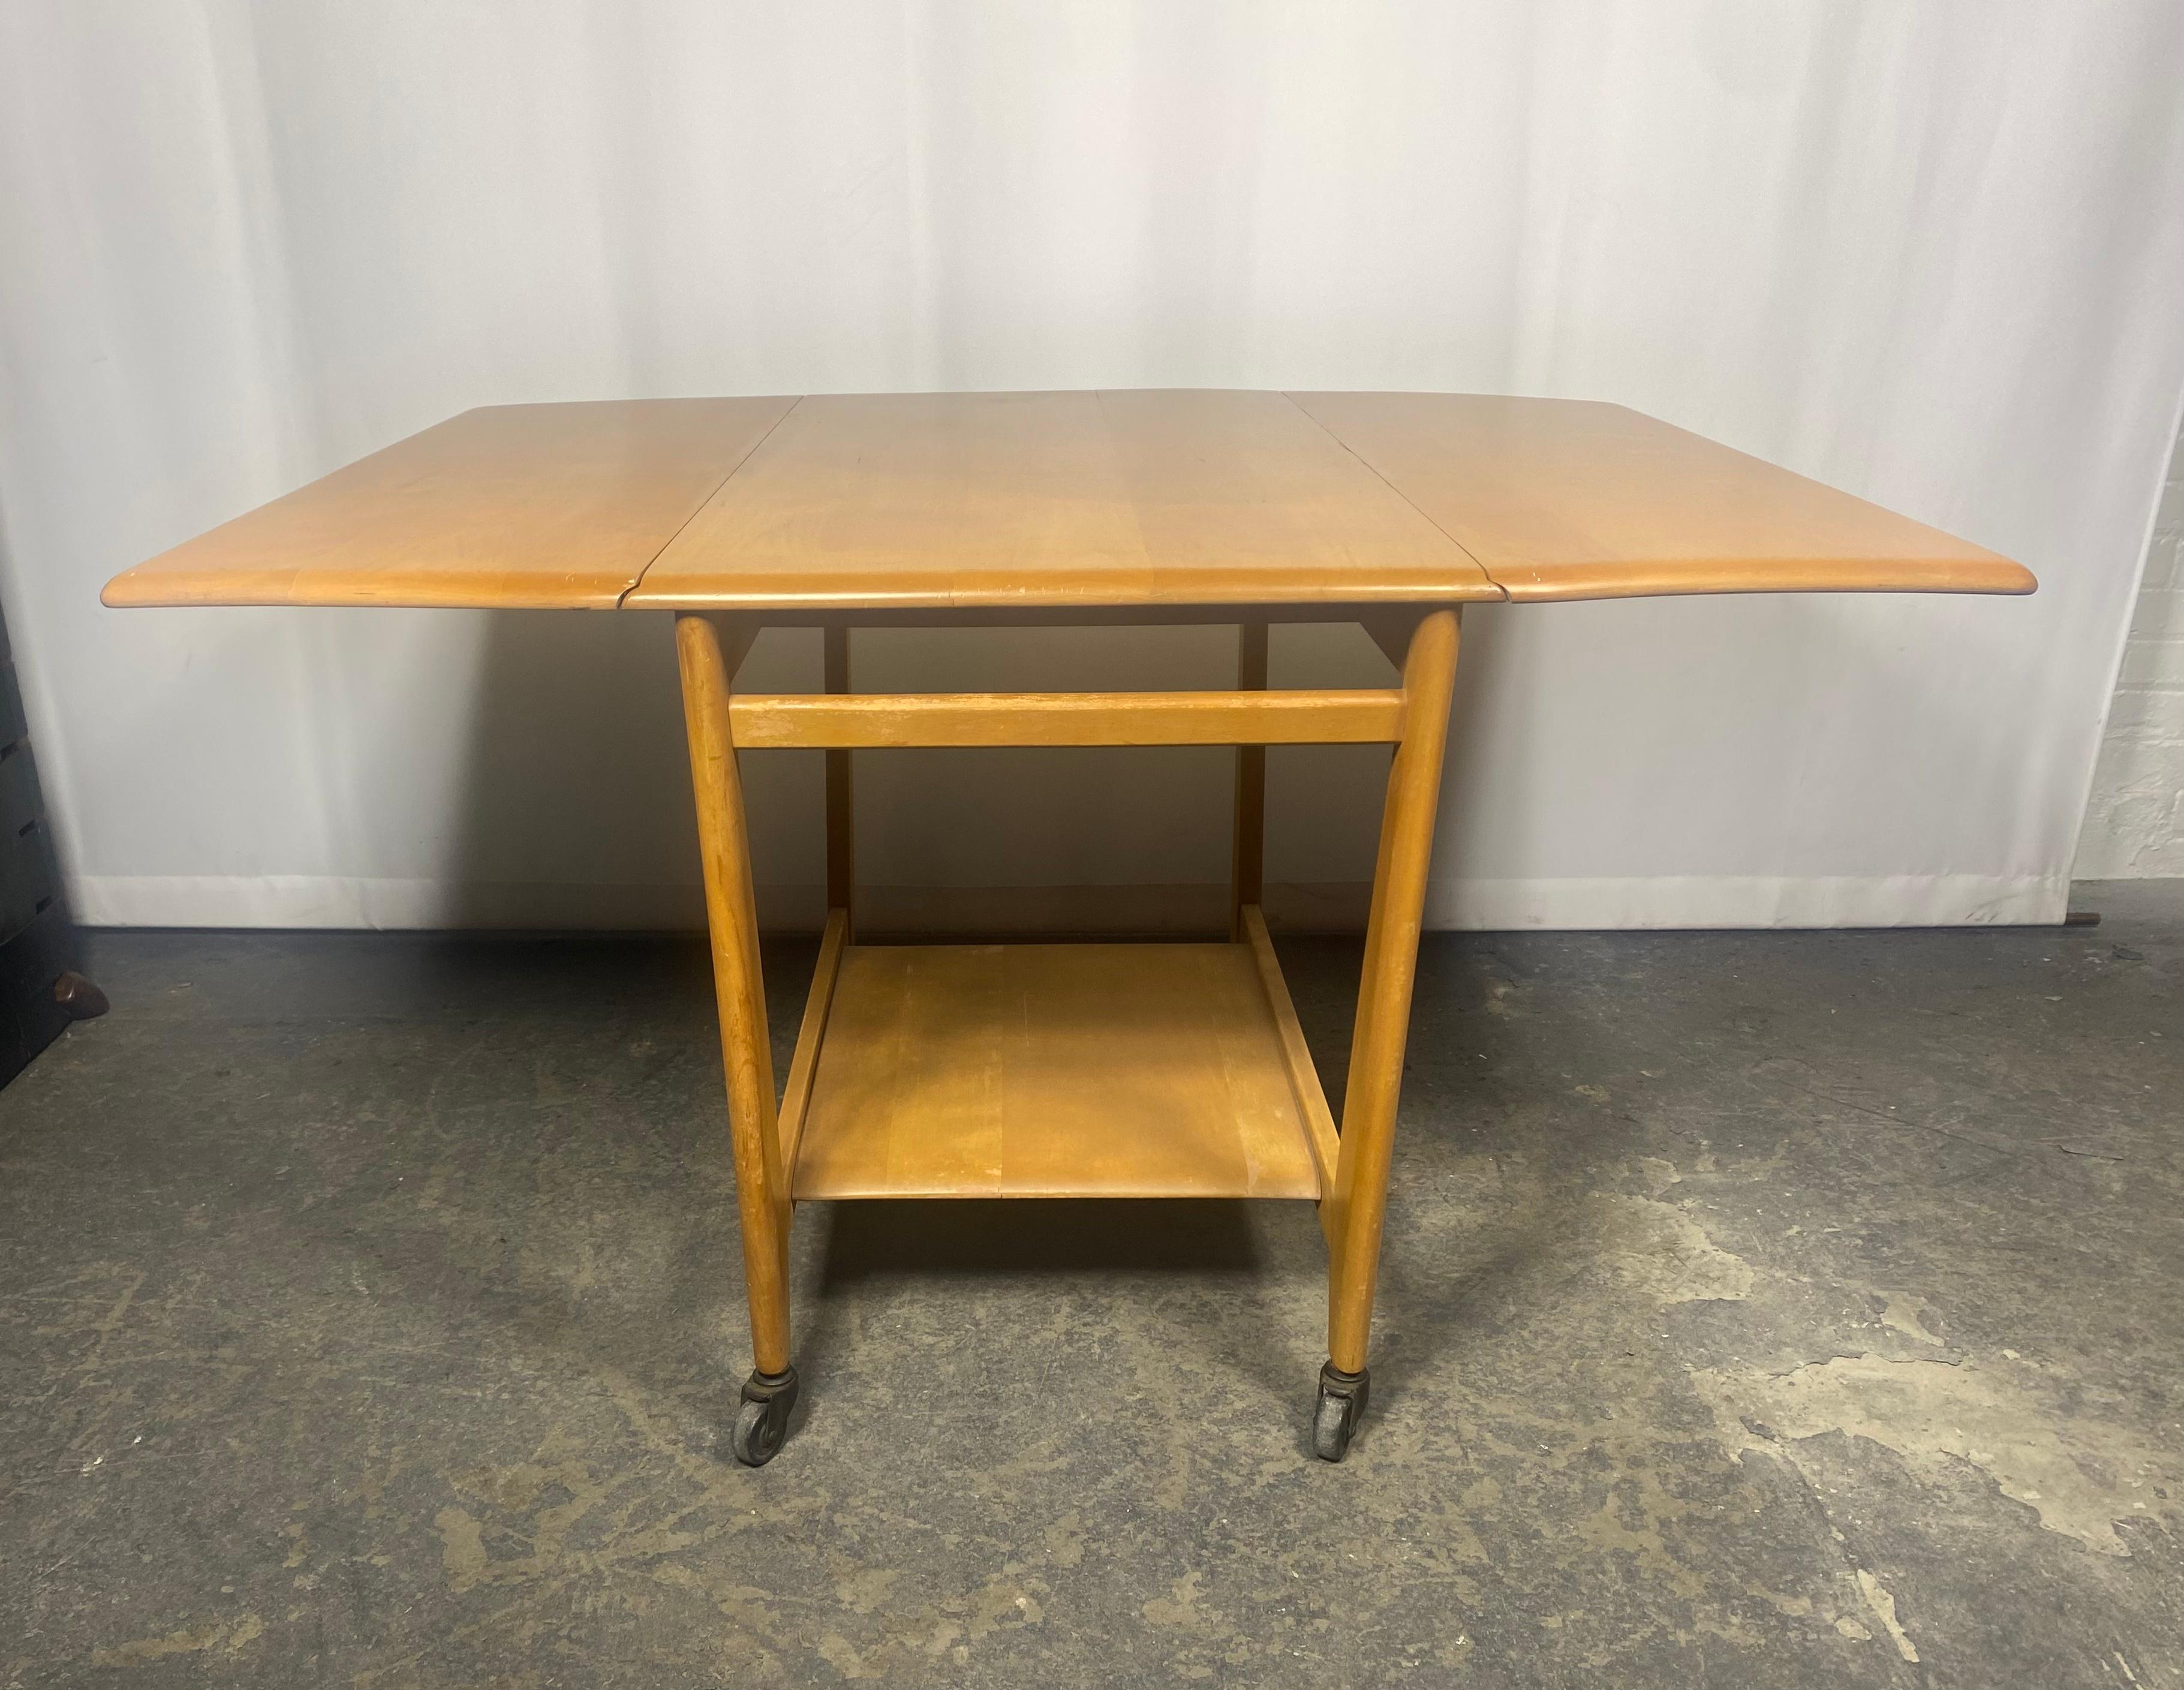 Rare Mid Century Modern Heywood Wakefield Drop Leaf Serving Bar Cart..Nice original condition.Wonderful color ,patina, design.

Multi-purpose serving cart for use as a bar cart, a serving cart for large dinners, a breakfast table for two, or an